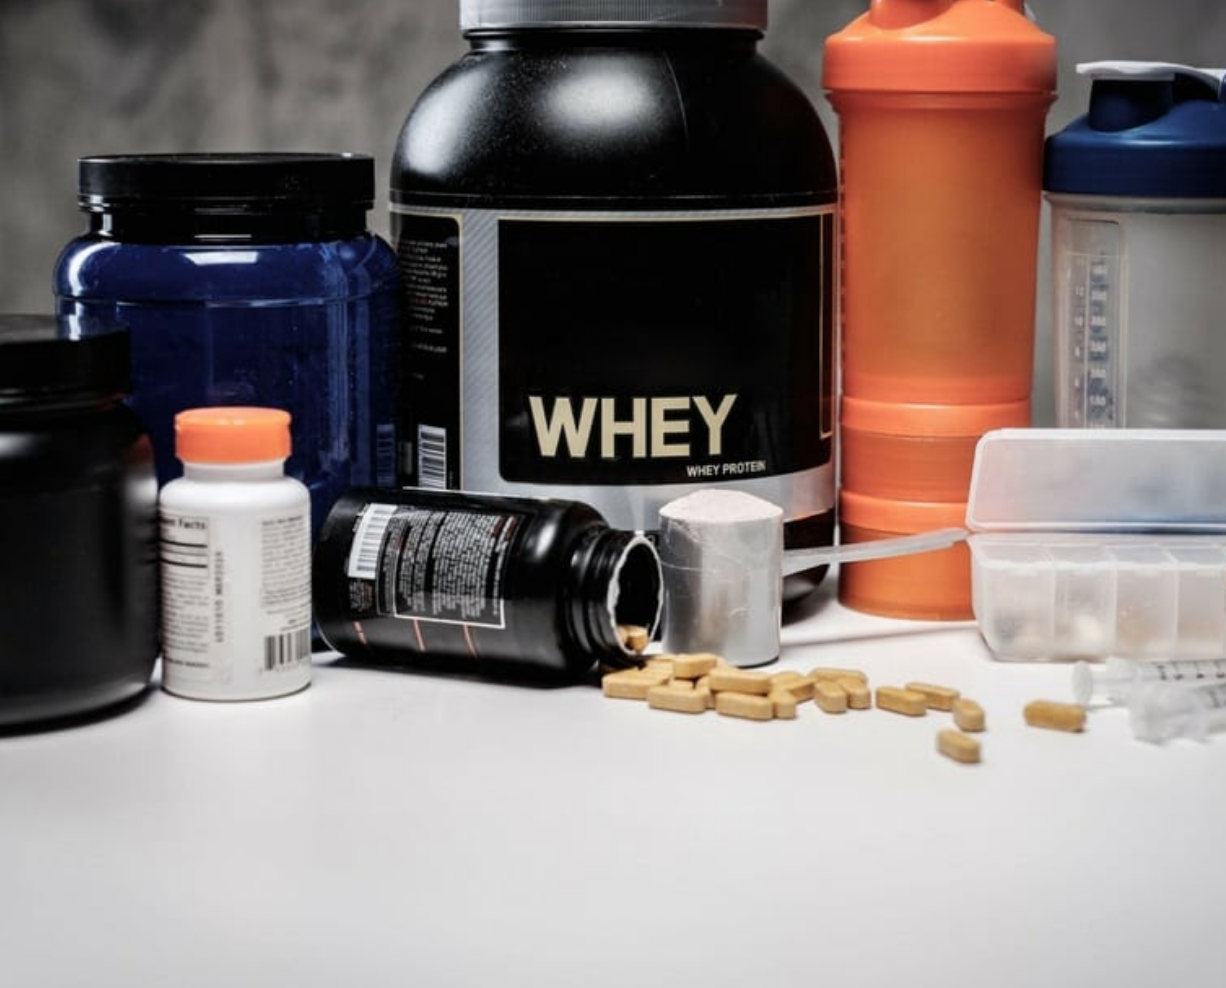 7 Key Things to be Aware of When Choosing Supplements For Your Gym